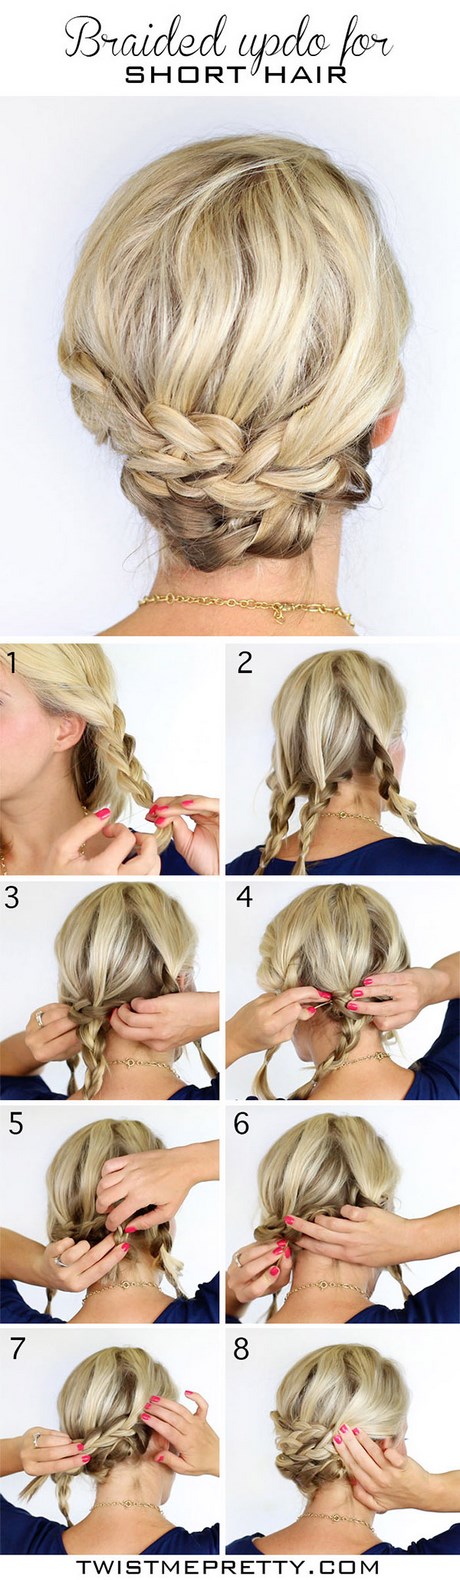 do-it-yourself-updos-for-short-hair-18_18 Do it yourself updos for short hair